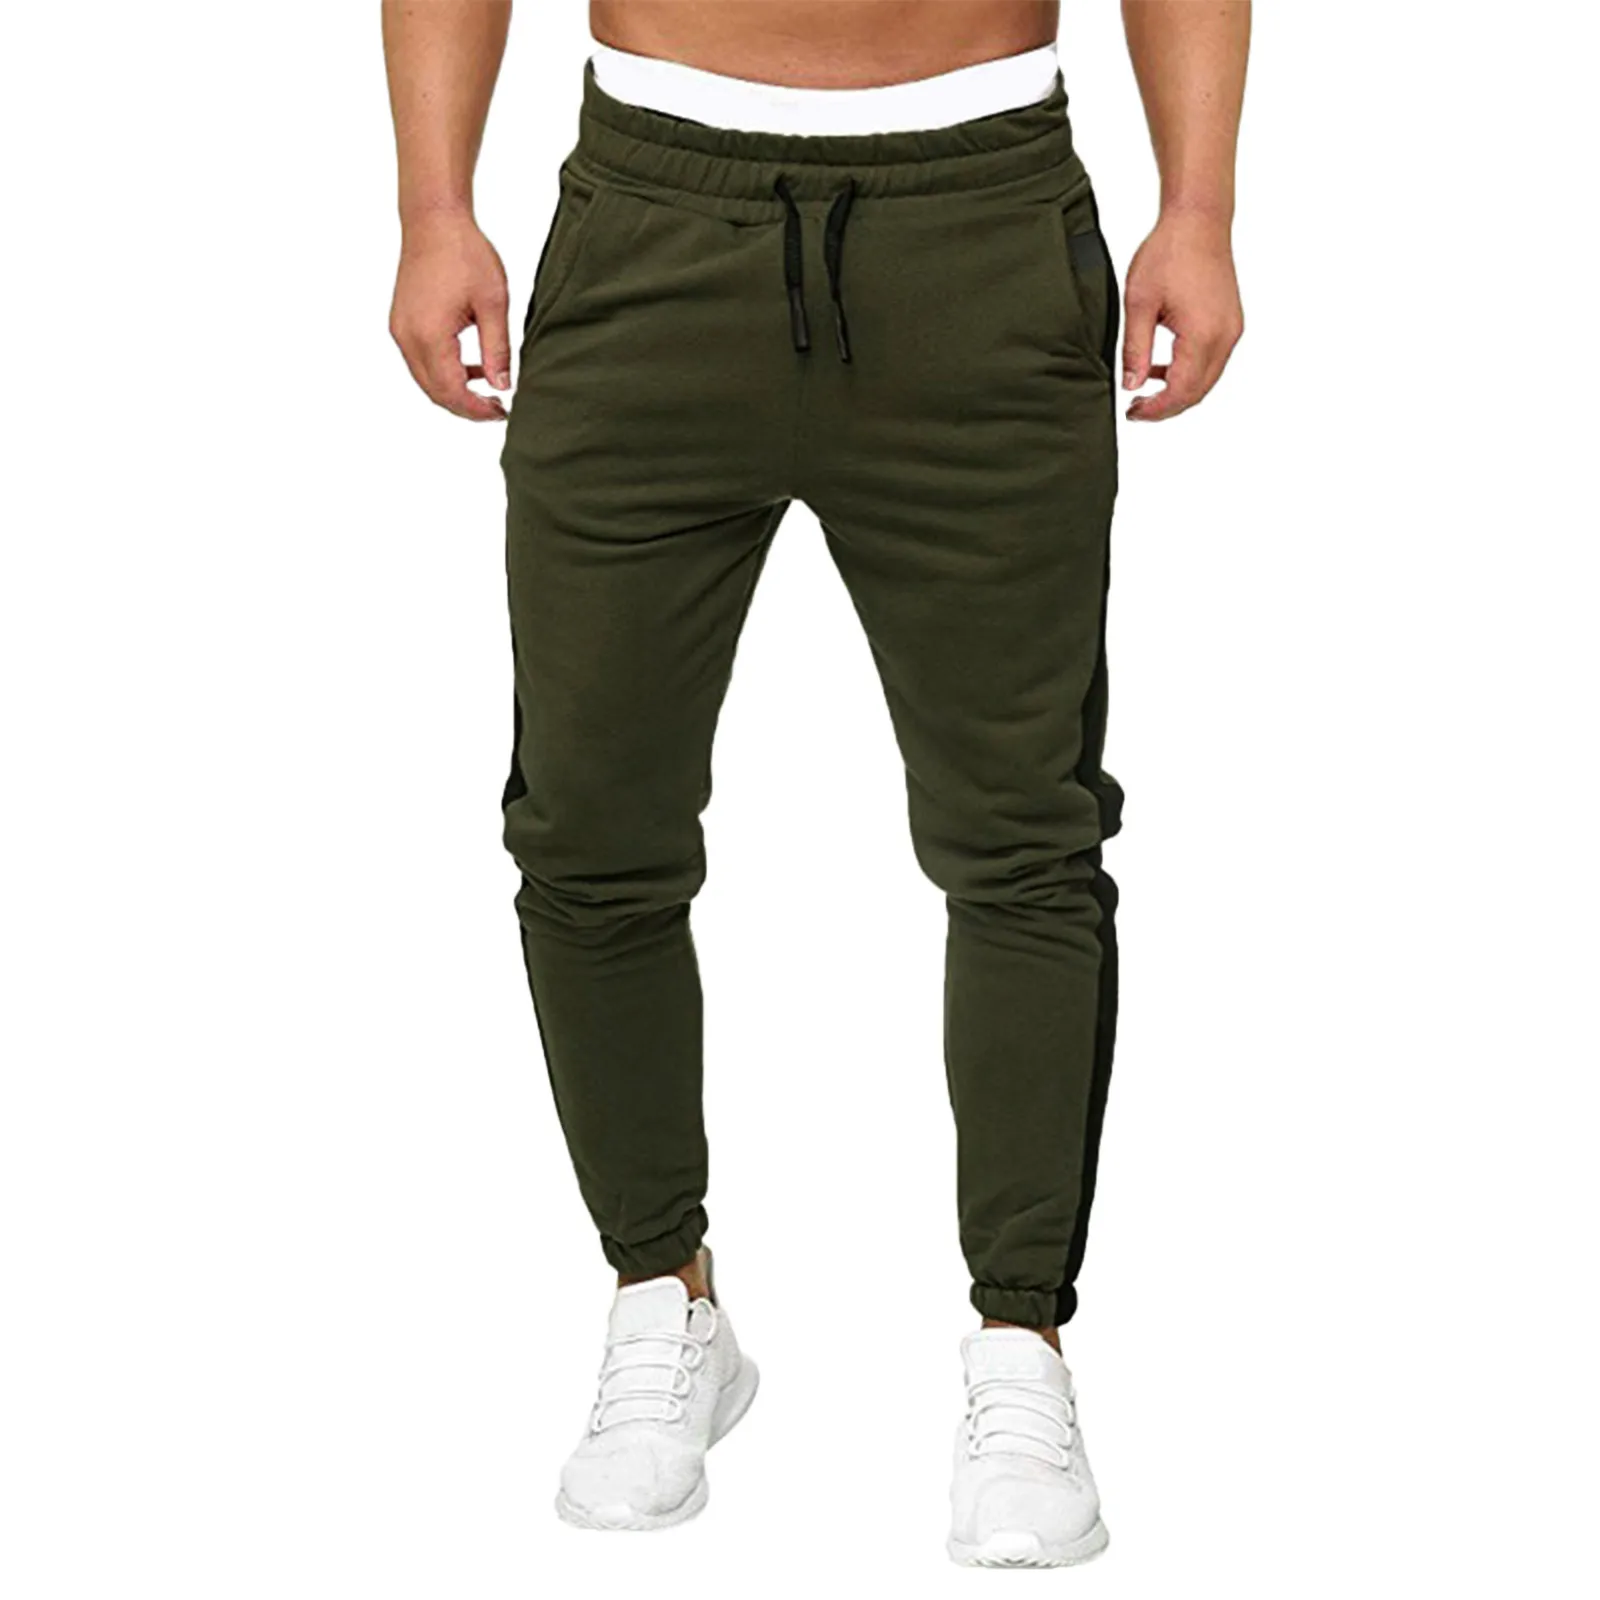 

Mens Sports Running Pants With Zipper Pockets Elasticity Long Trousers Tracksuit Fitness Workout Joggers Training Gym Sweatpants